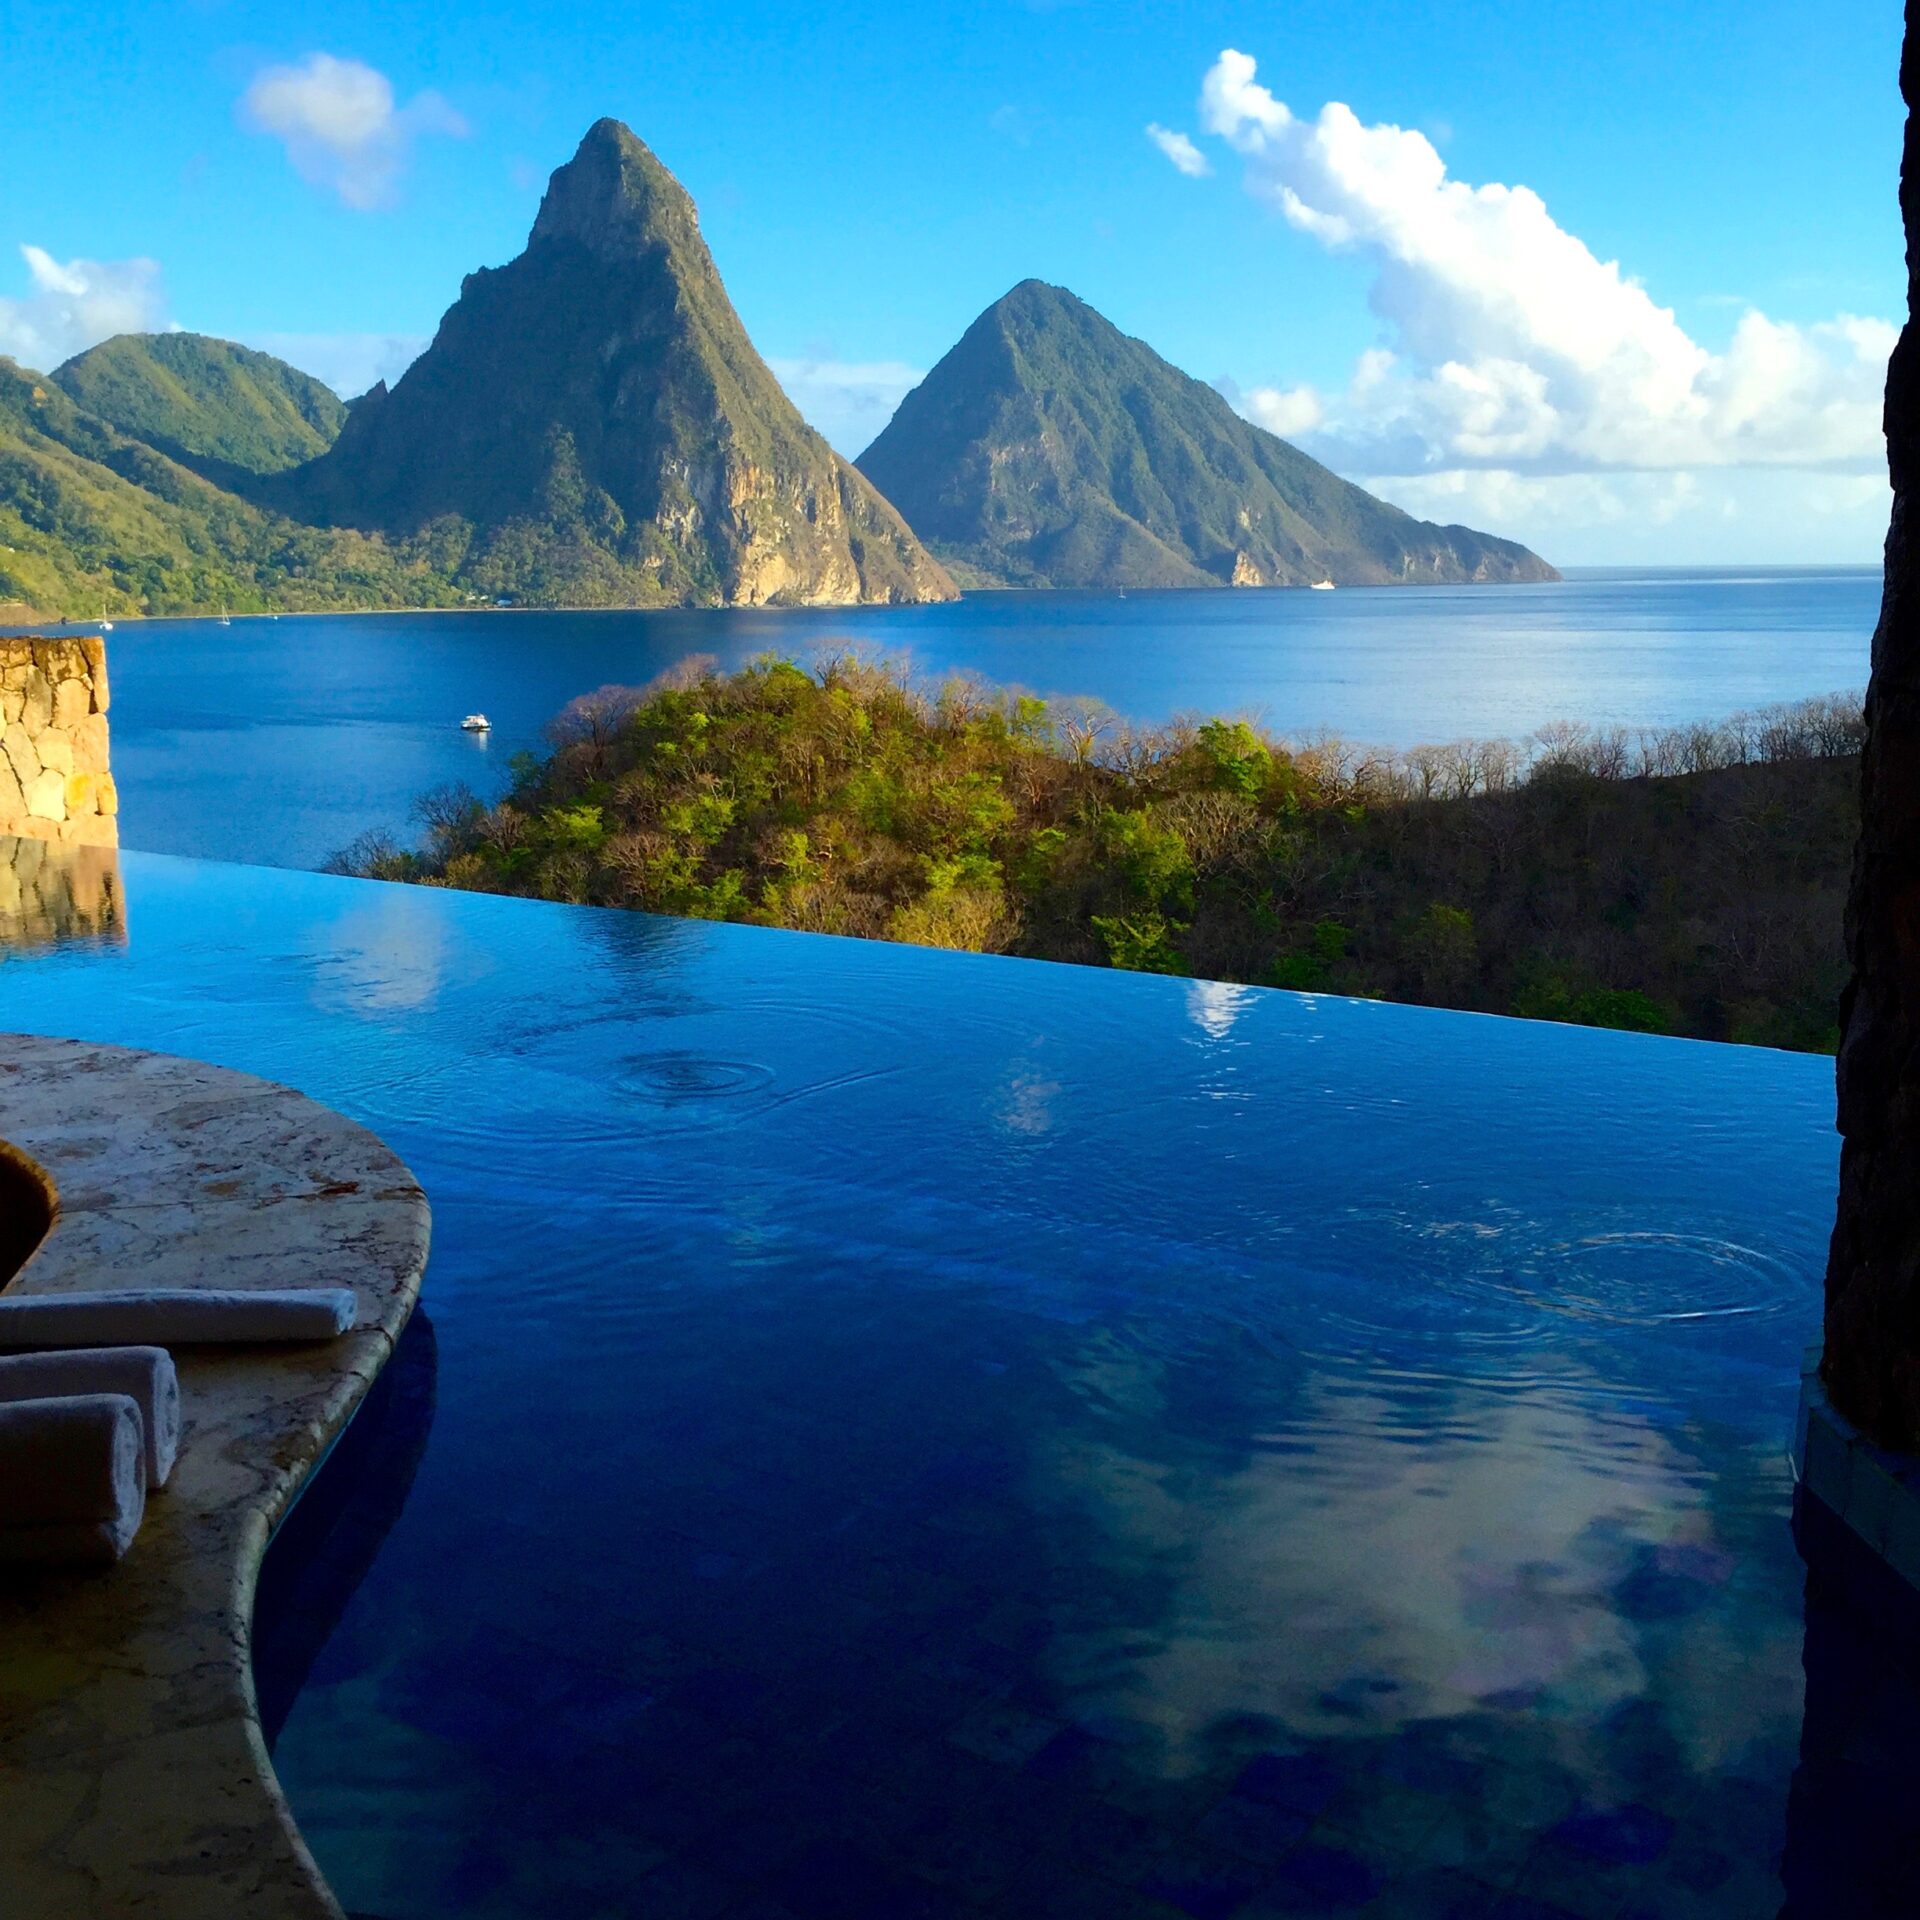 Sitting at the ledge of the infinity pool at Jade Mountain overlooking the Caribbean